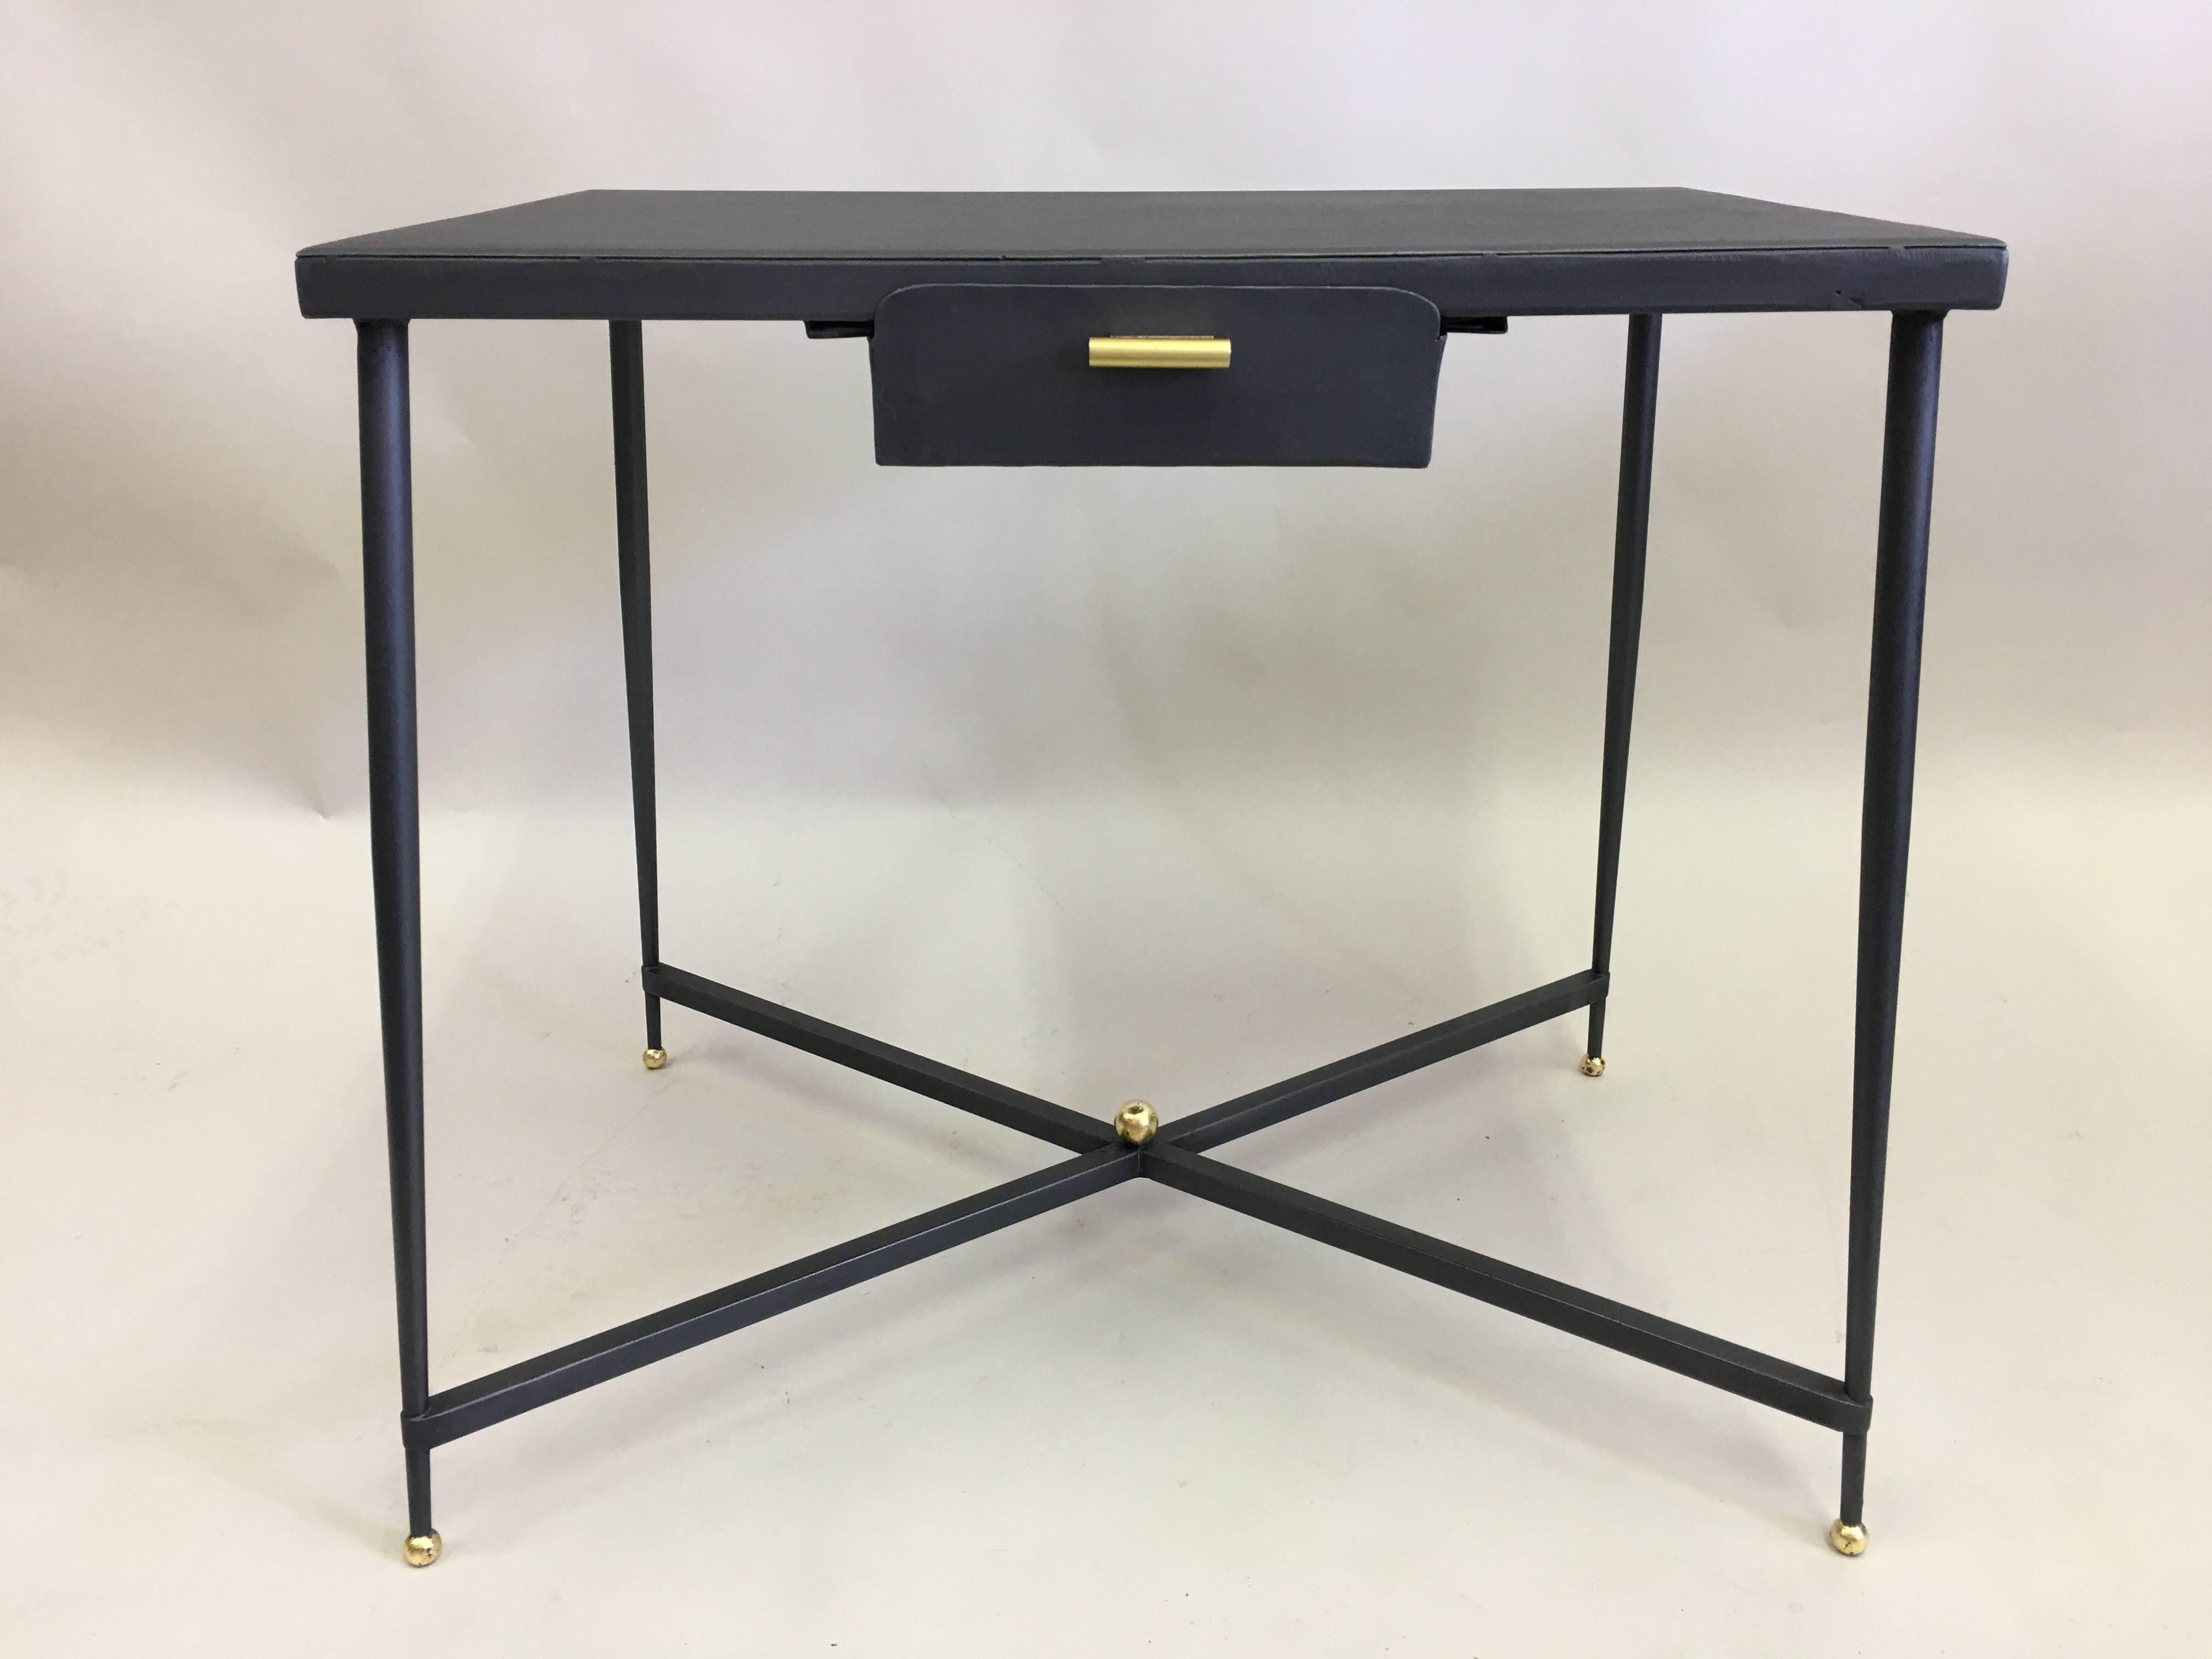 Gilt French Mid-Century Modern Neoclassical Desk /Writing Table by Jacques Adnet 1940 For Sale